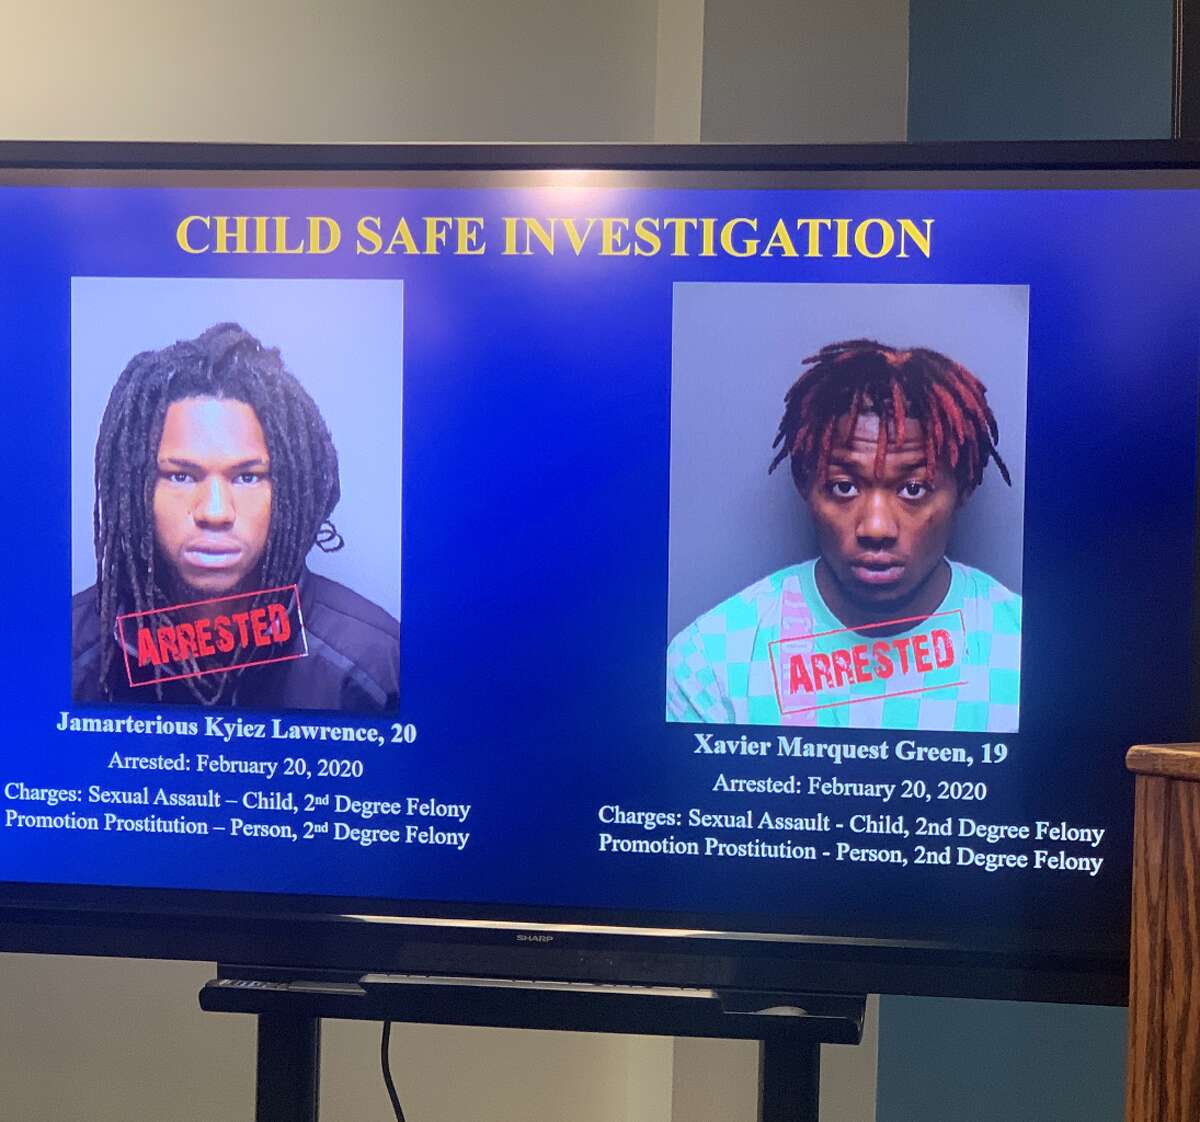 Jamarterious Kyiez Lawrence, 20, and Xavier Marquest Green, 19, were both arrested and charged with sexual assault with a child and promotion of prostitution on Thursday.